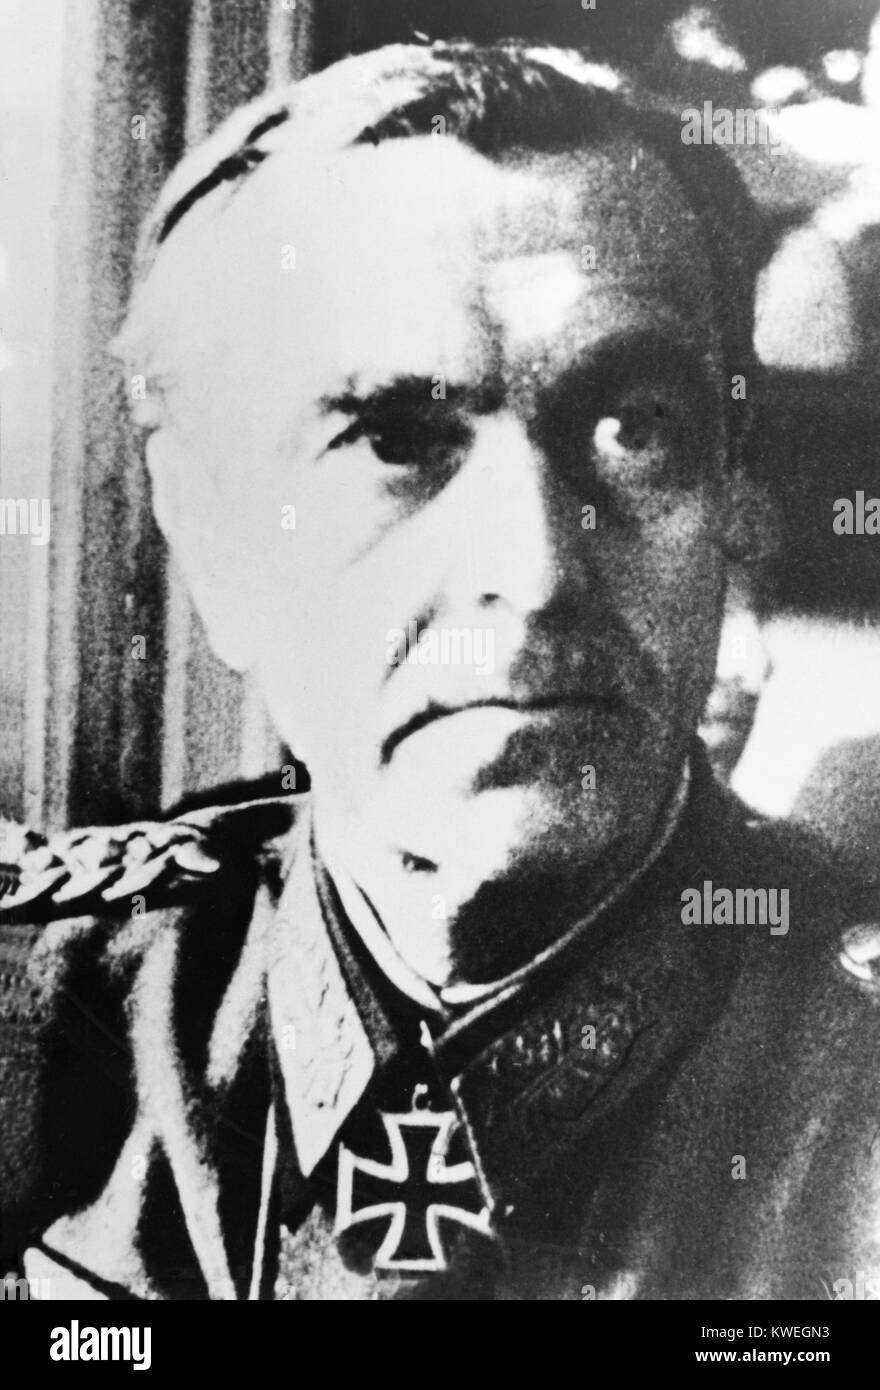 Field Marshal Friedrich von Paulus (1890 - 1957). The highest ranking German Officer captured by the Russians after his Sixth Army surrendered at Stalingrad in 1942. Hitler expected Paulus to commit suicide, repeating to his staff that there was no precedent of a German field marshal ever being captured alive. While in Soviet captivity during the war, Paulus became a vocal critic of the Nazi regime and joined the Soviet-sponsored National Committee for a Free Germany. He moved to East Germany in 1953. Stock Photo